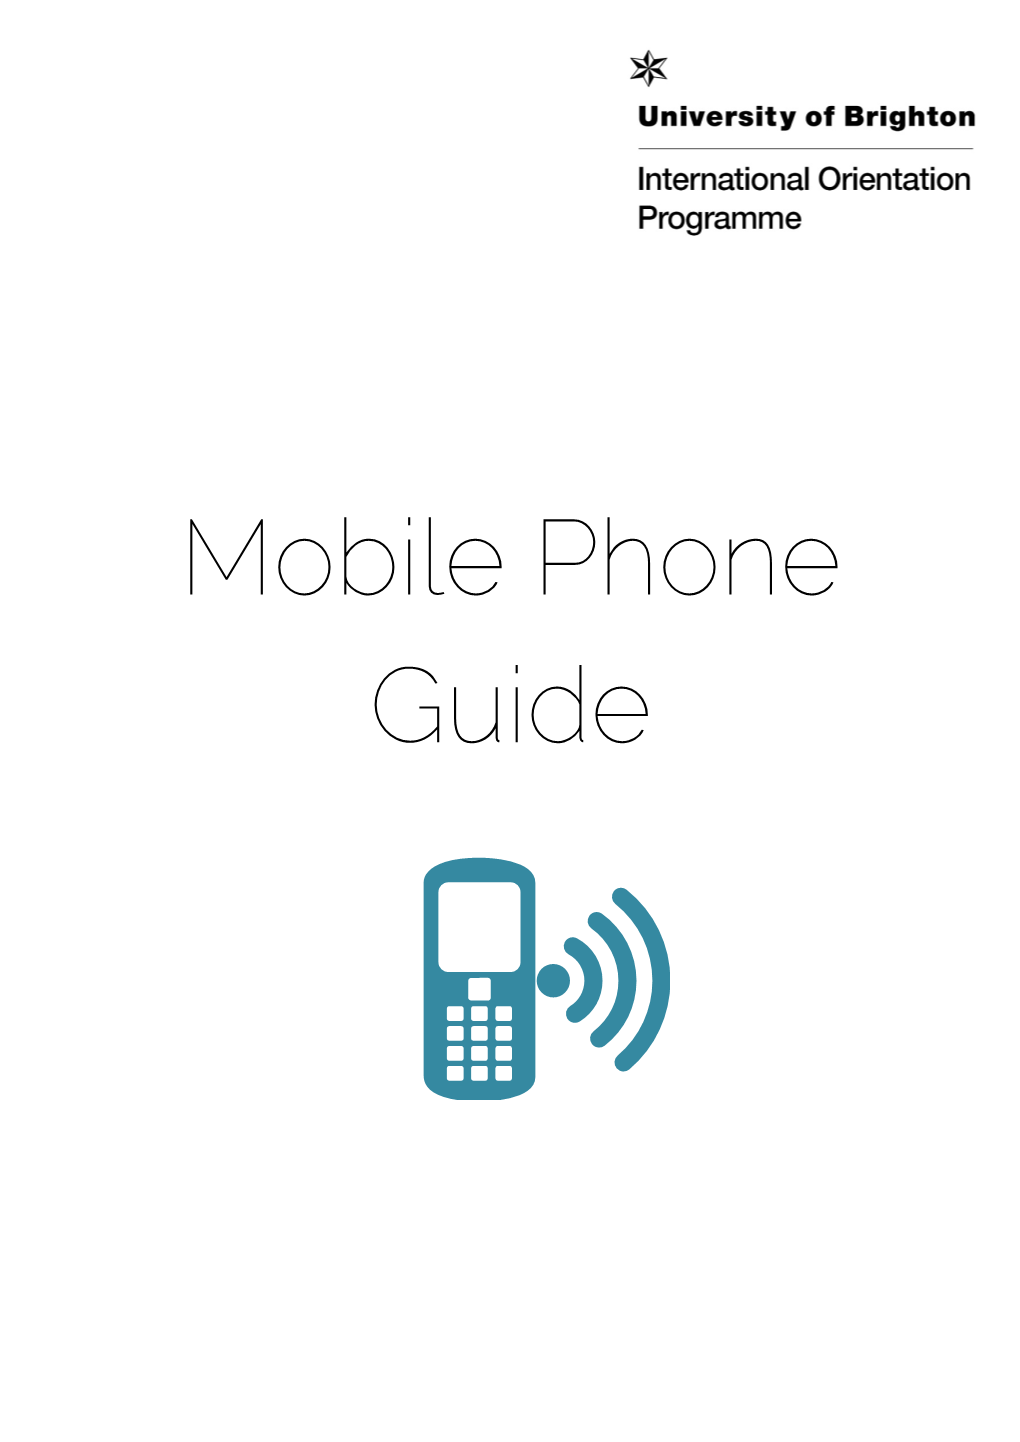 Mobile Phone Guide Your Guide to Mobile Phone Use in the UK